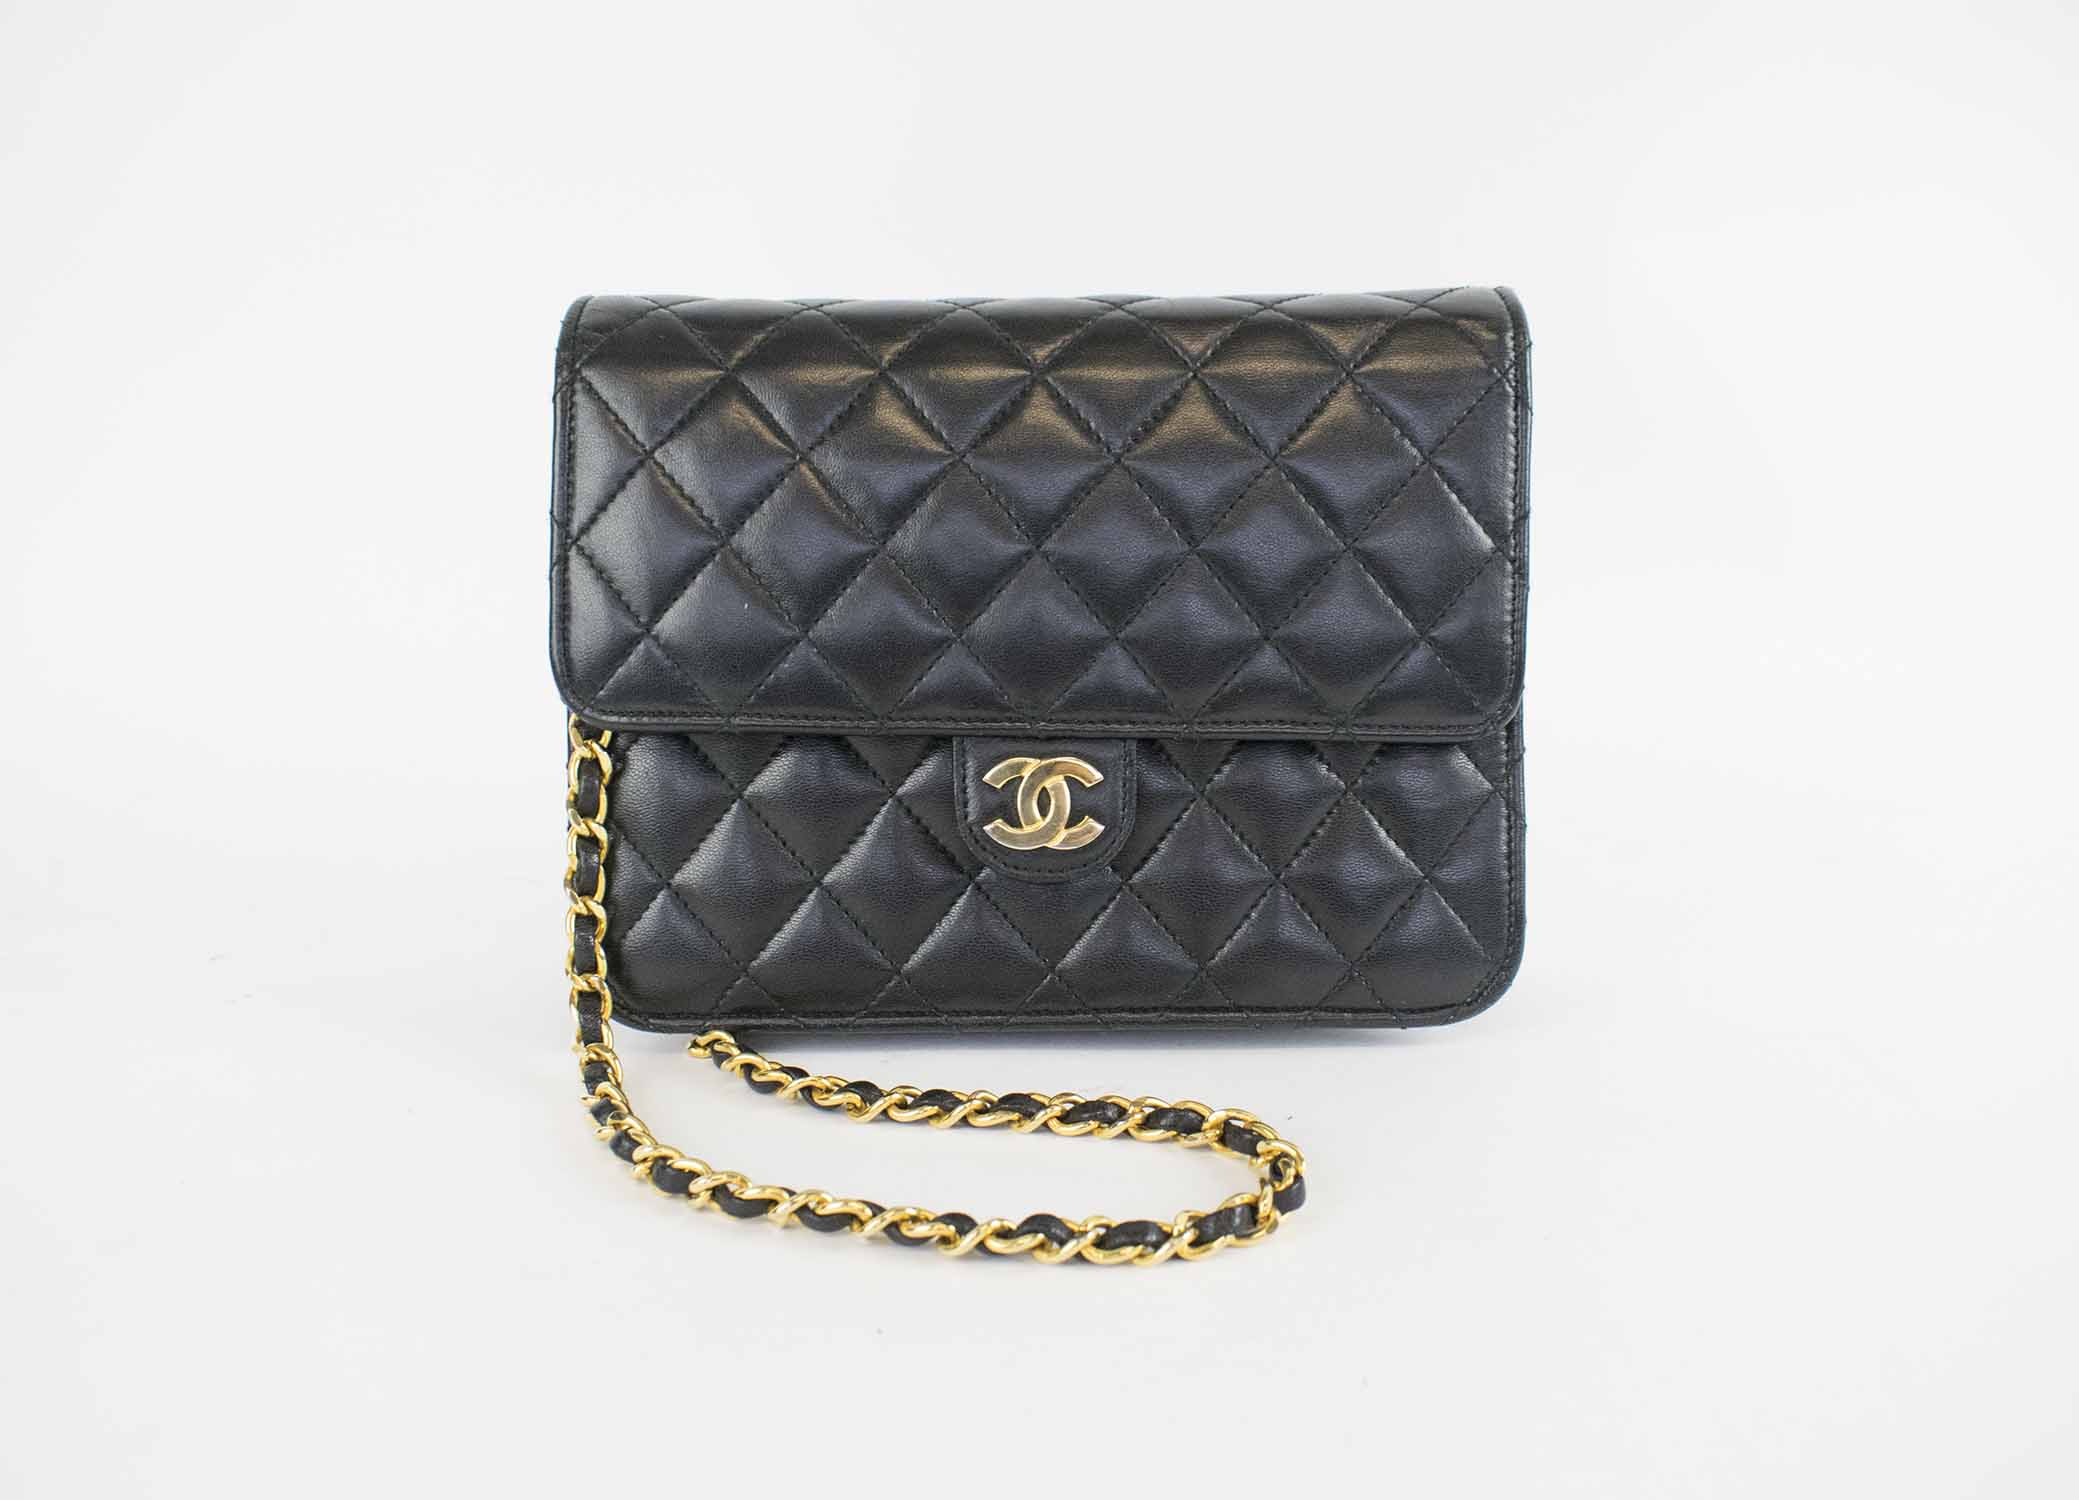 CHANEL VINTAGE CLUTCH/CROSSBODY BAG, iconic diamond quilted